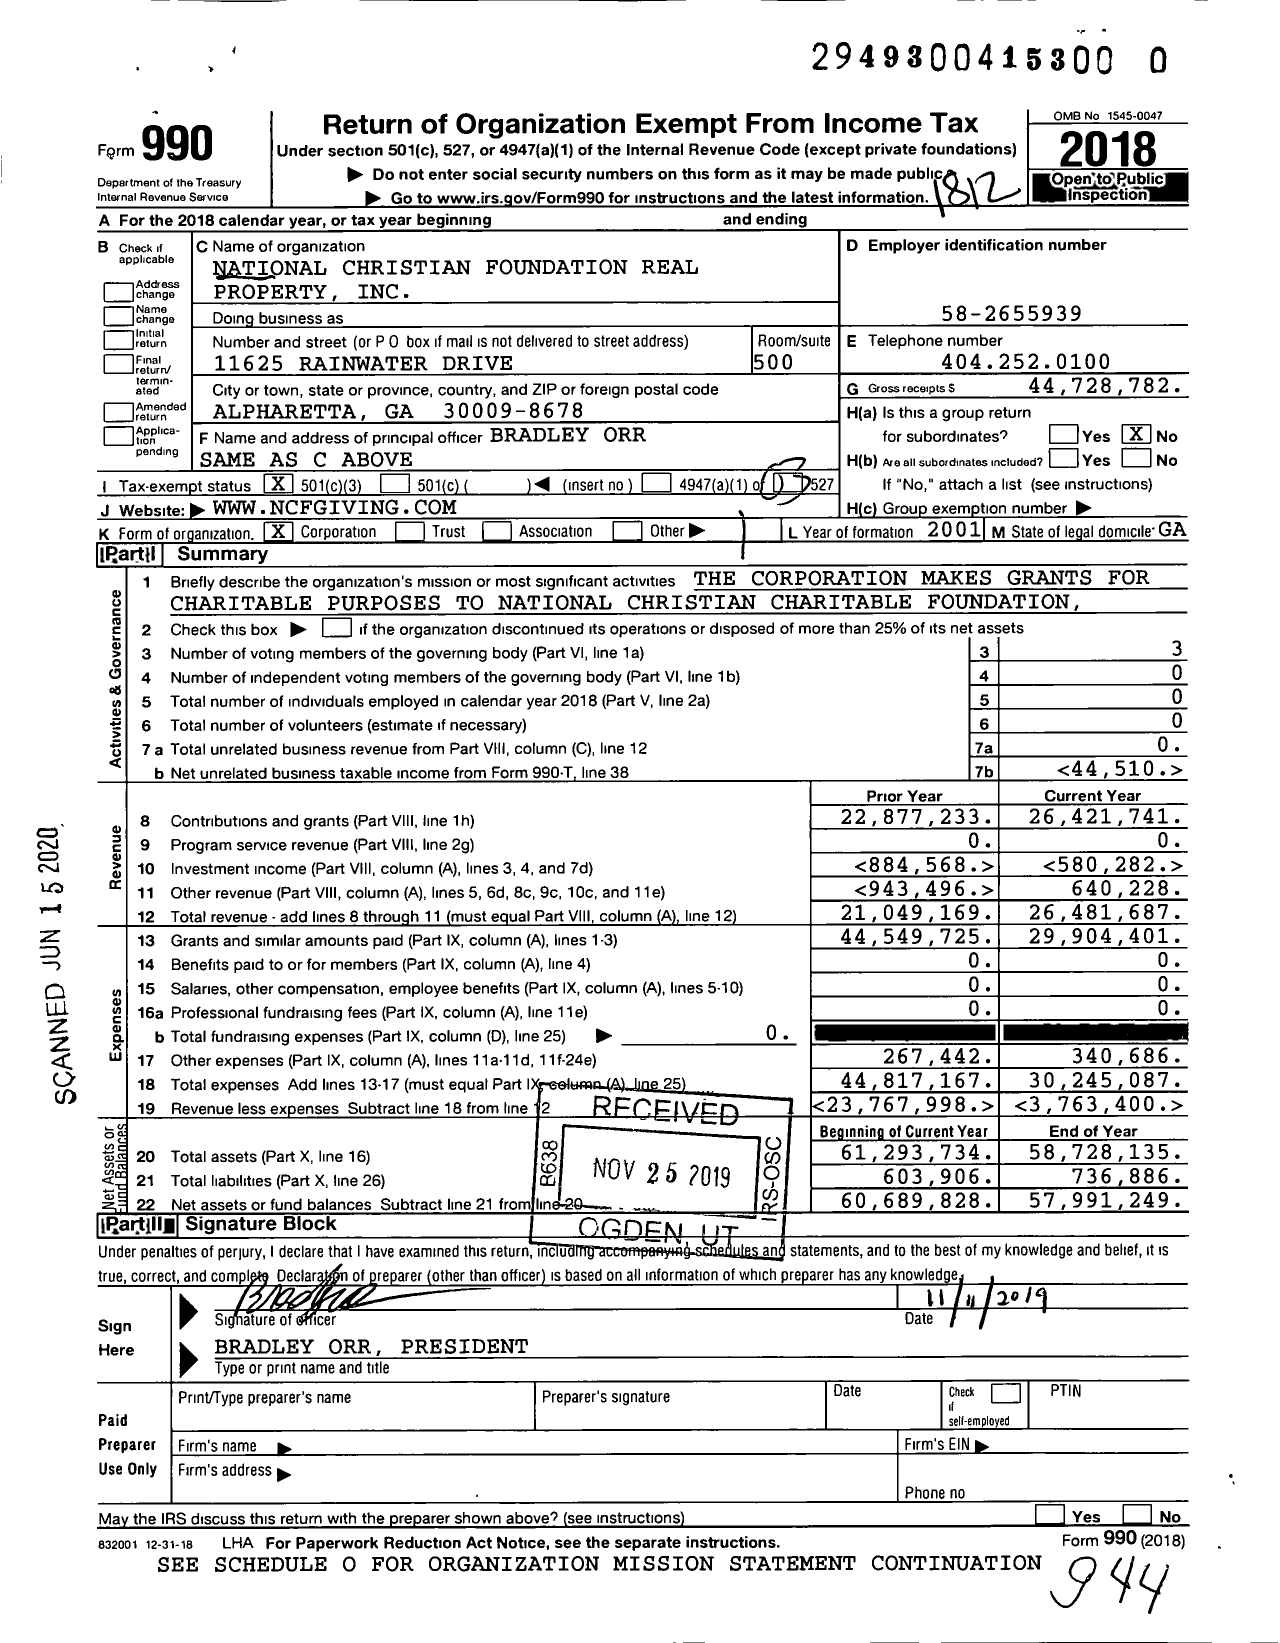 Image of first page of 2018 Form 990 for National Christian Foundation Real Property (NCF)